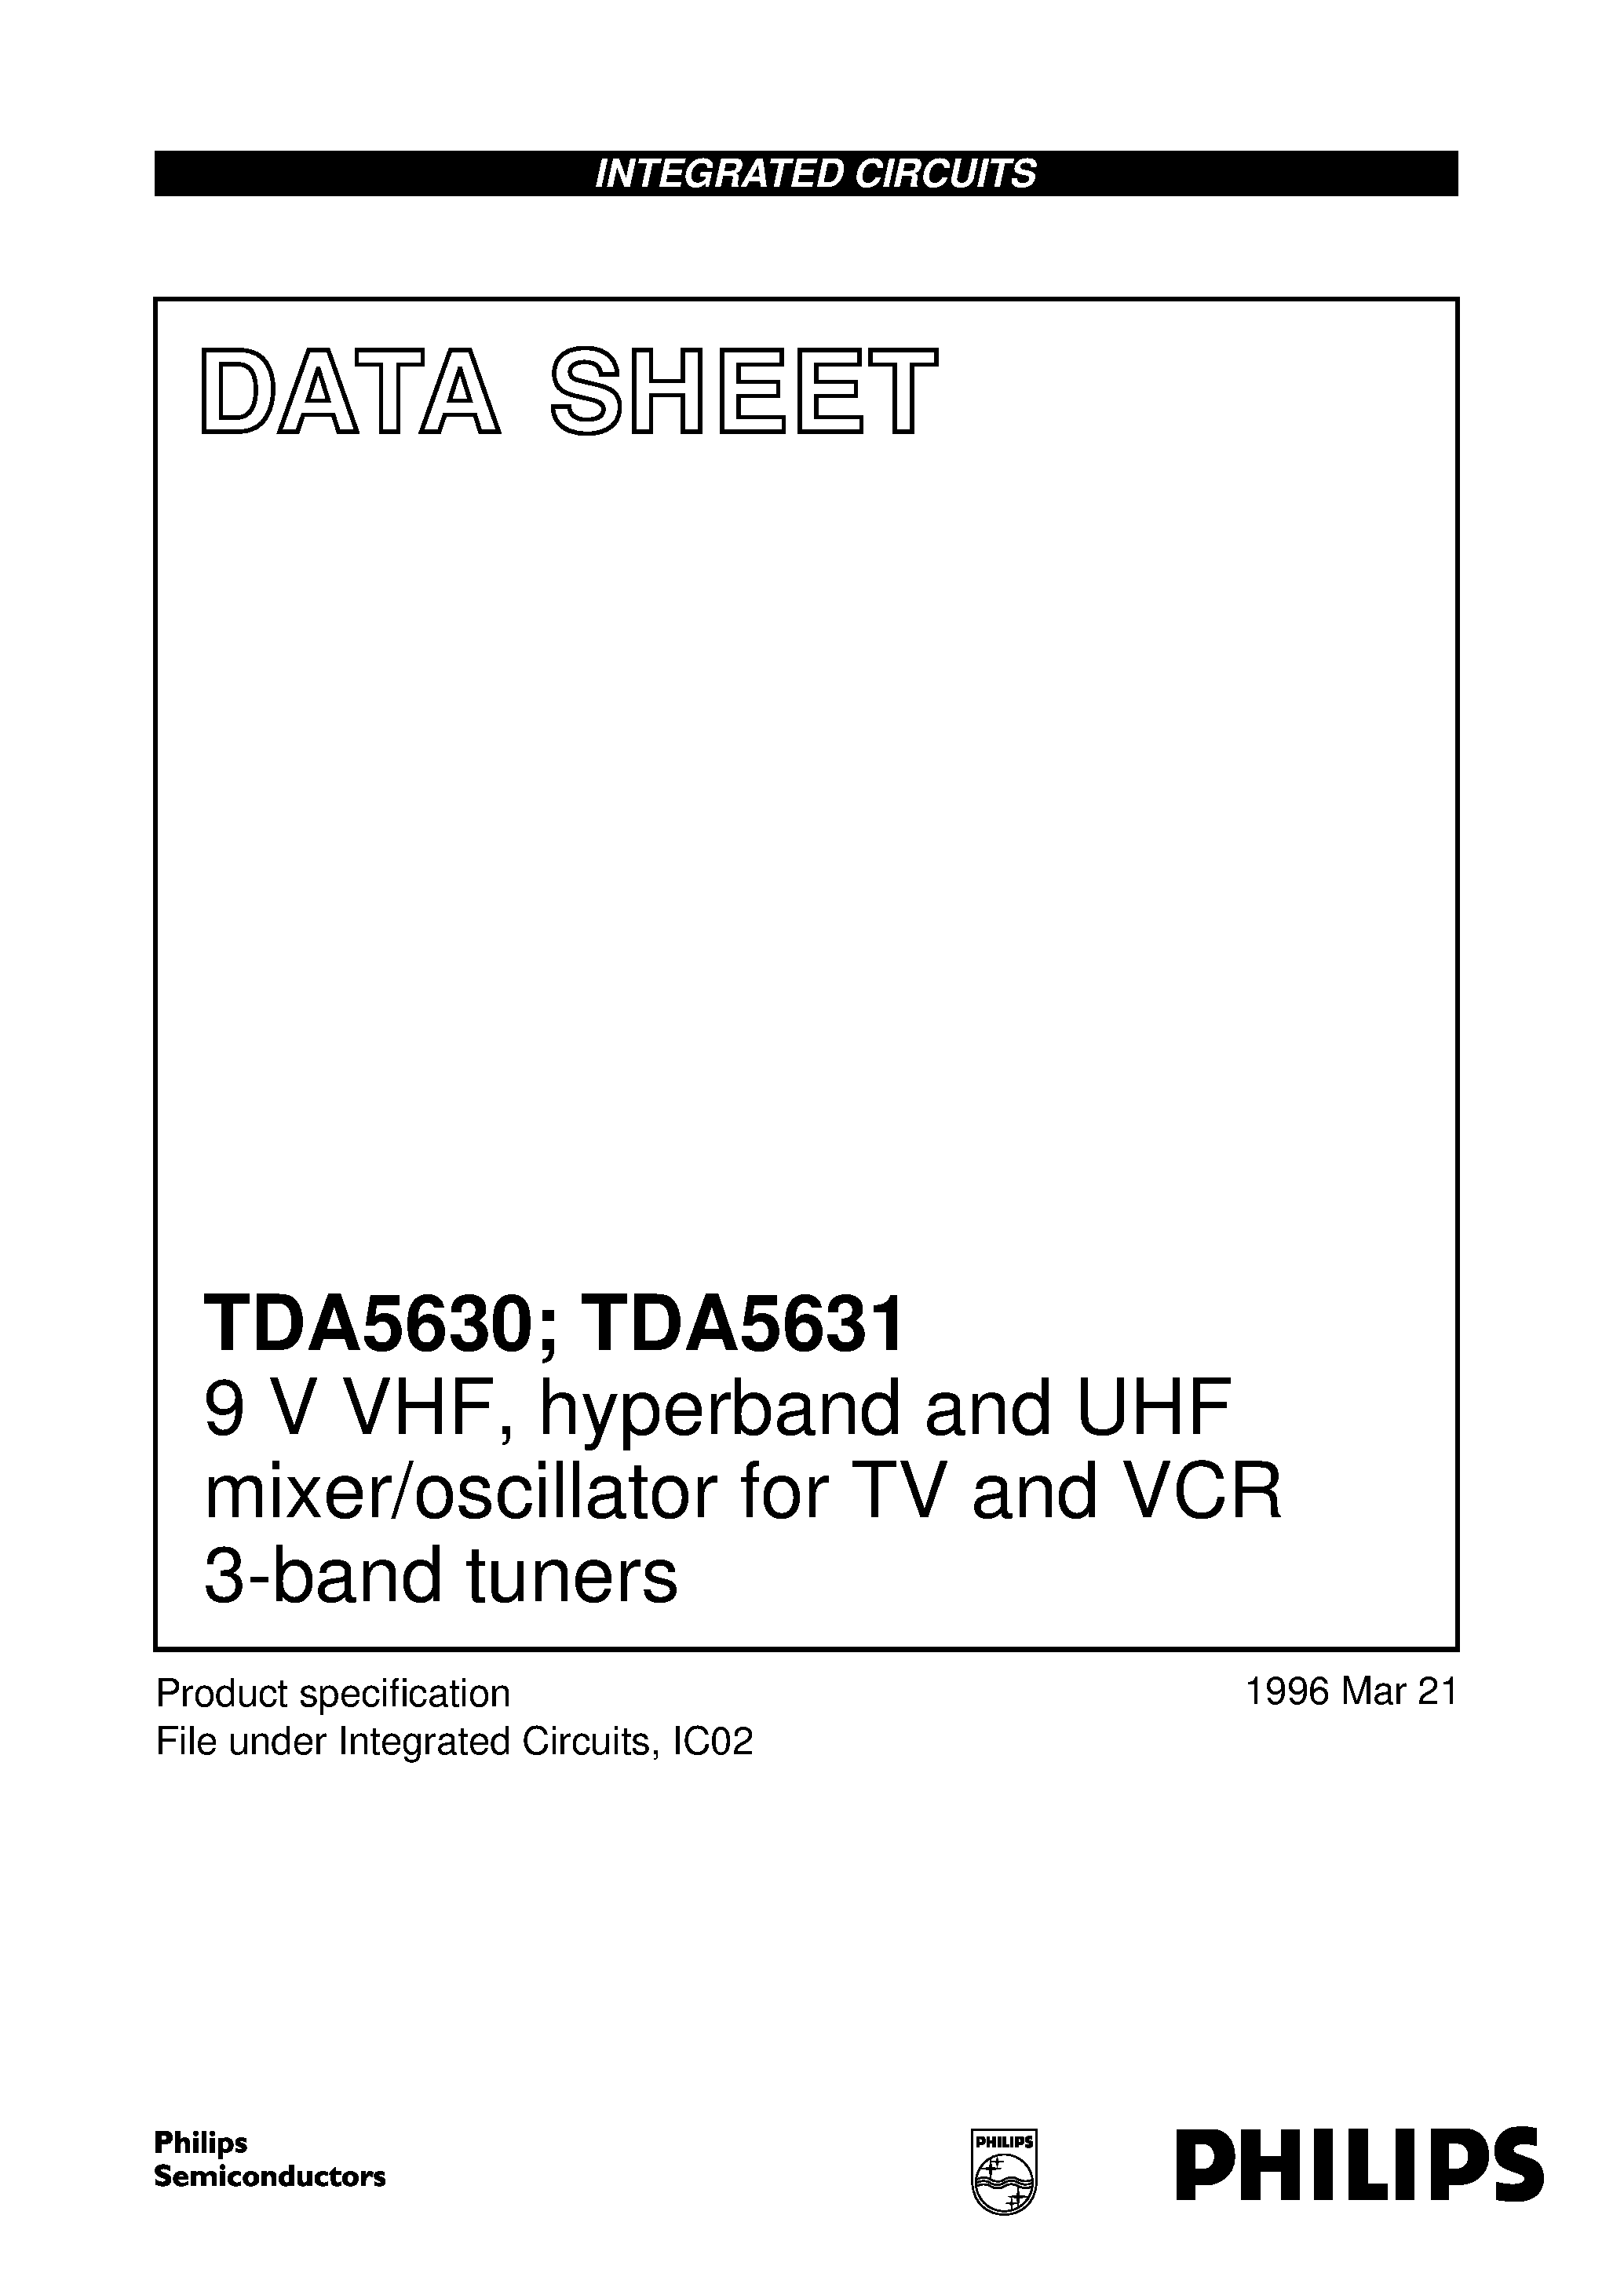 Datasheet TDA5630T - 9 V VHF/ hyperband and UHF mixer/oscillator for TV and VCR 3-band tuners page 1